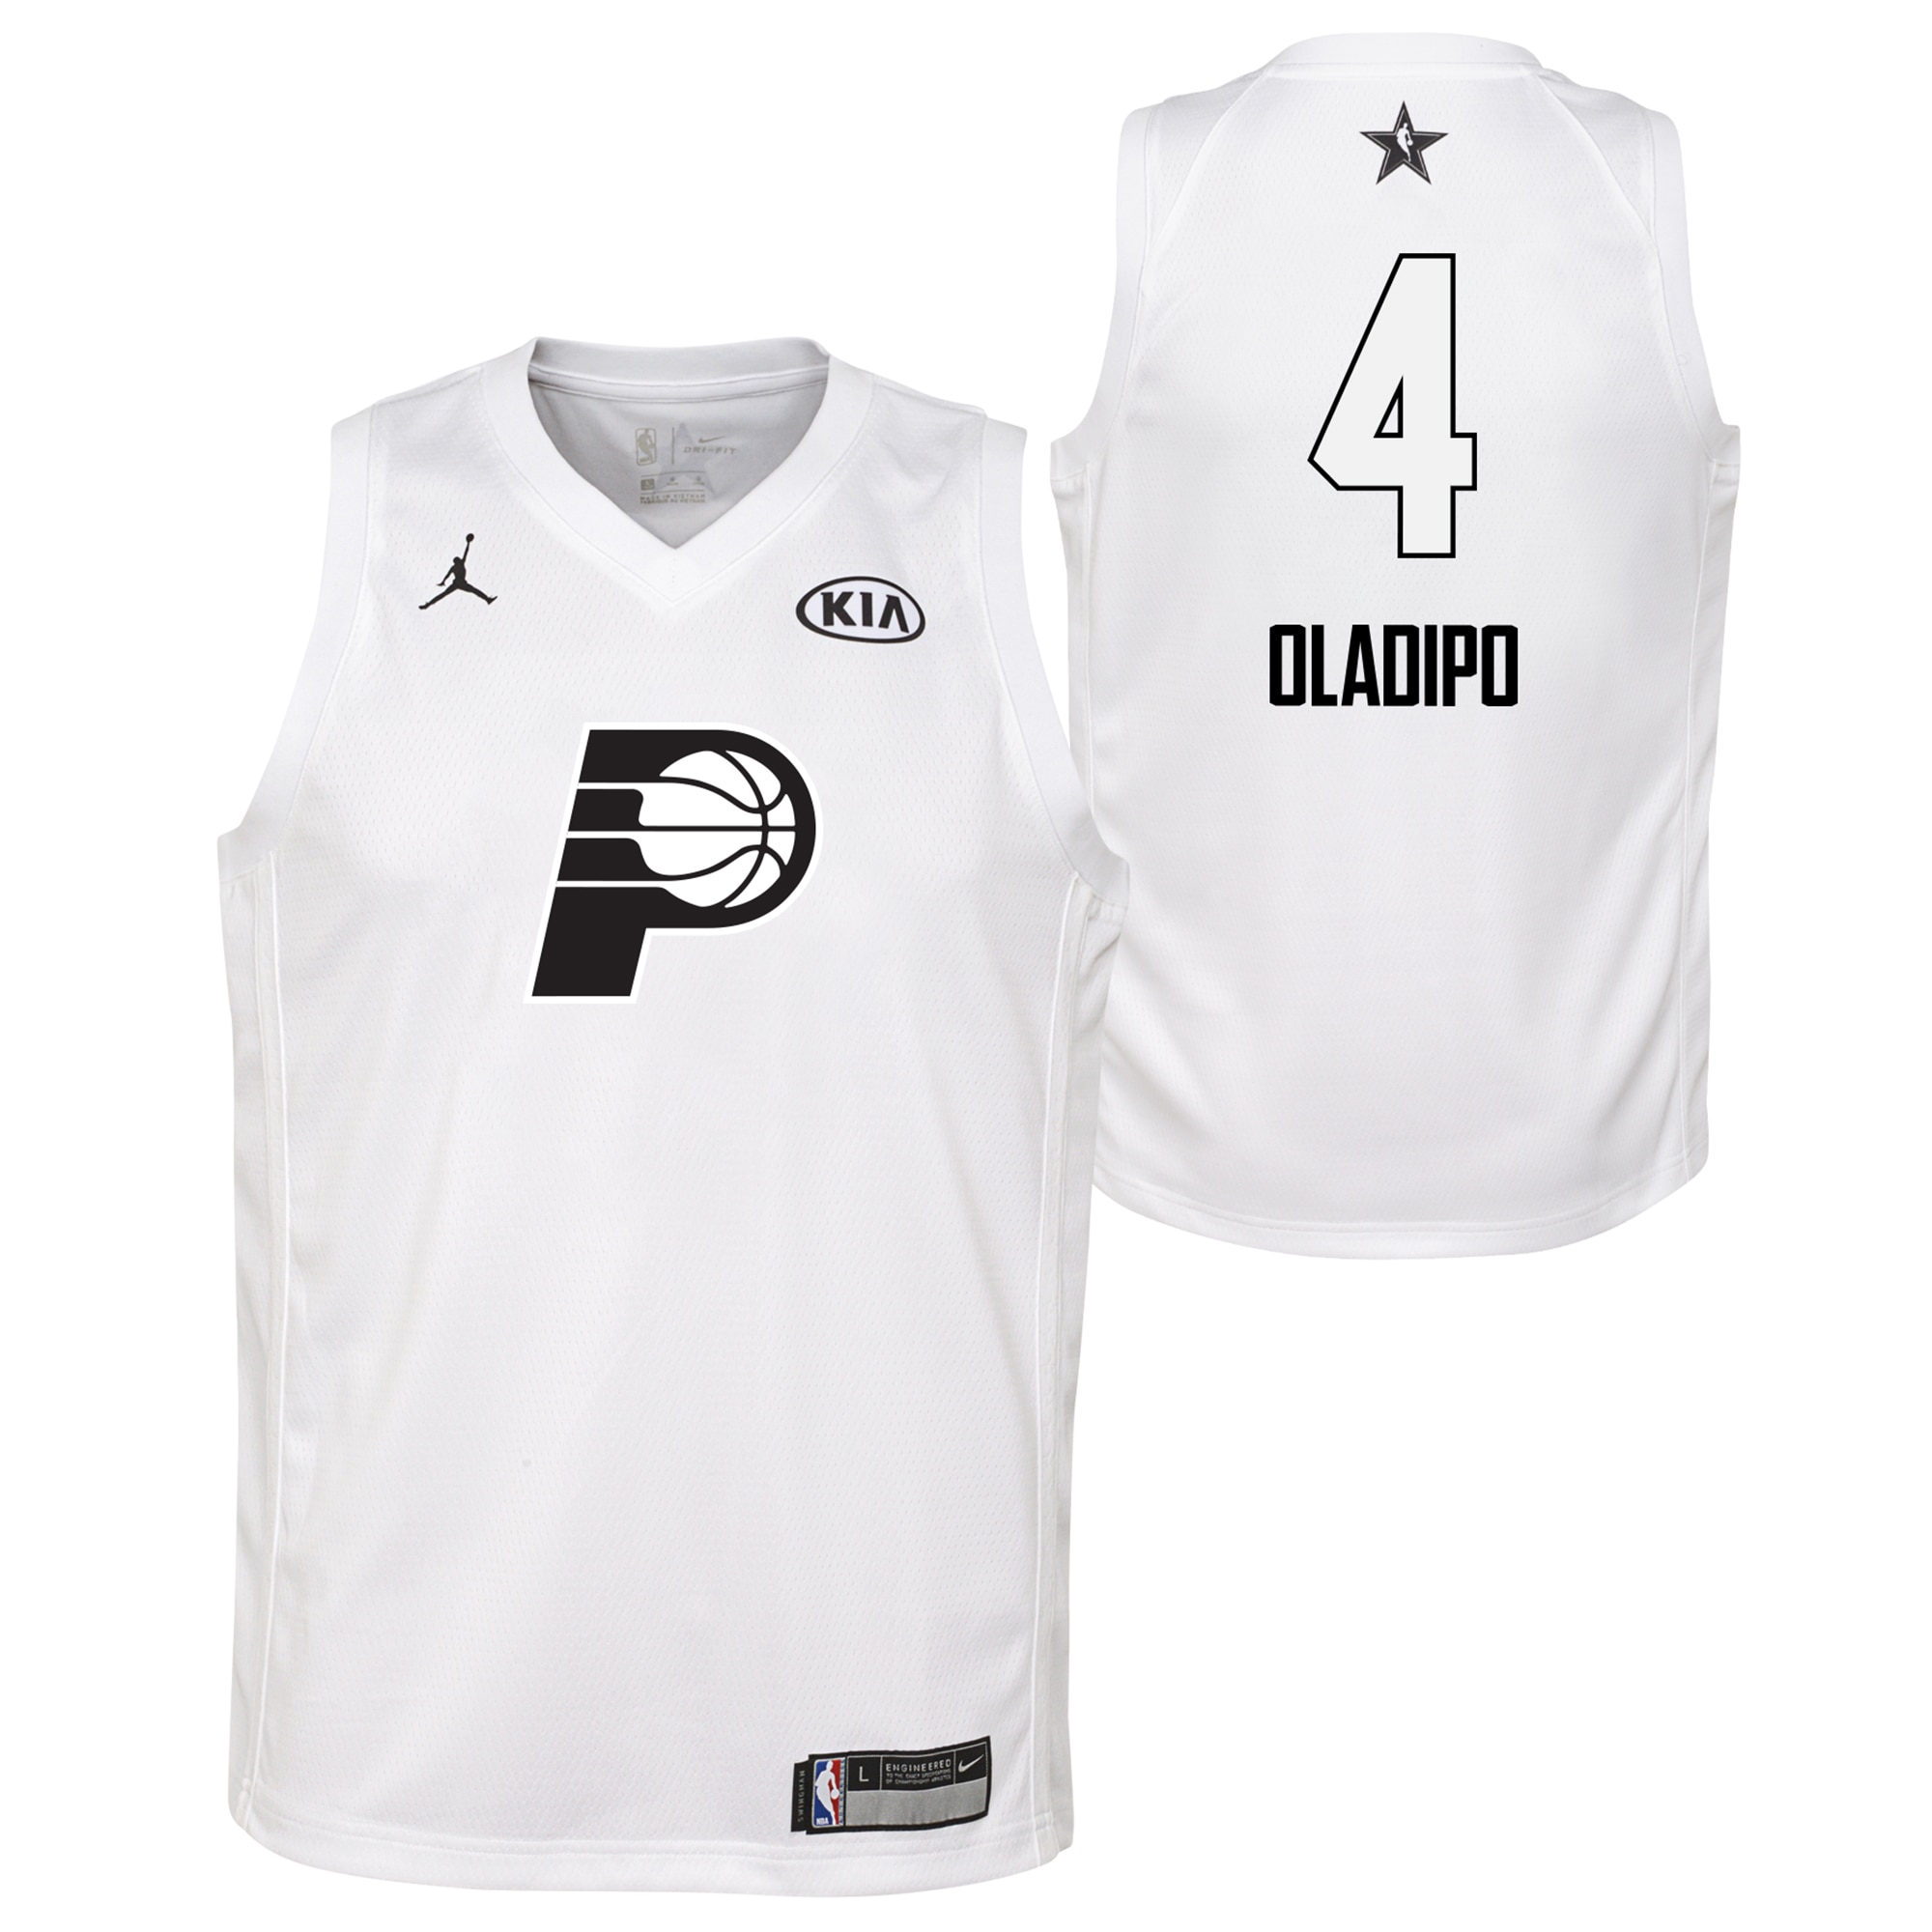 oladipo all star jersey